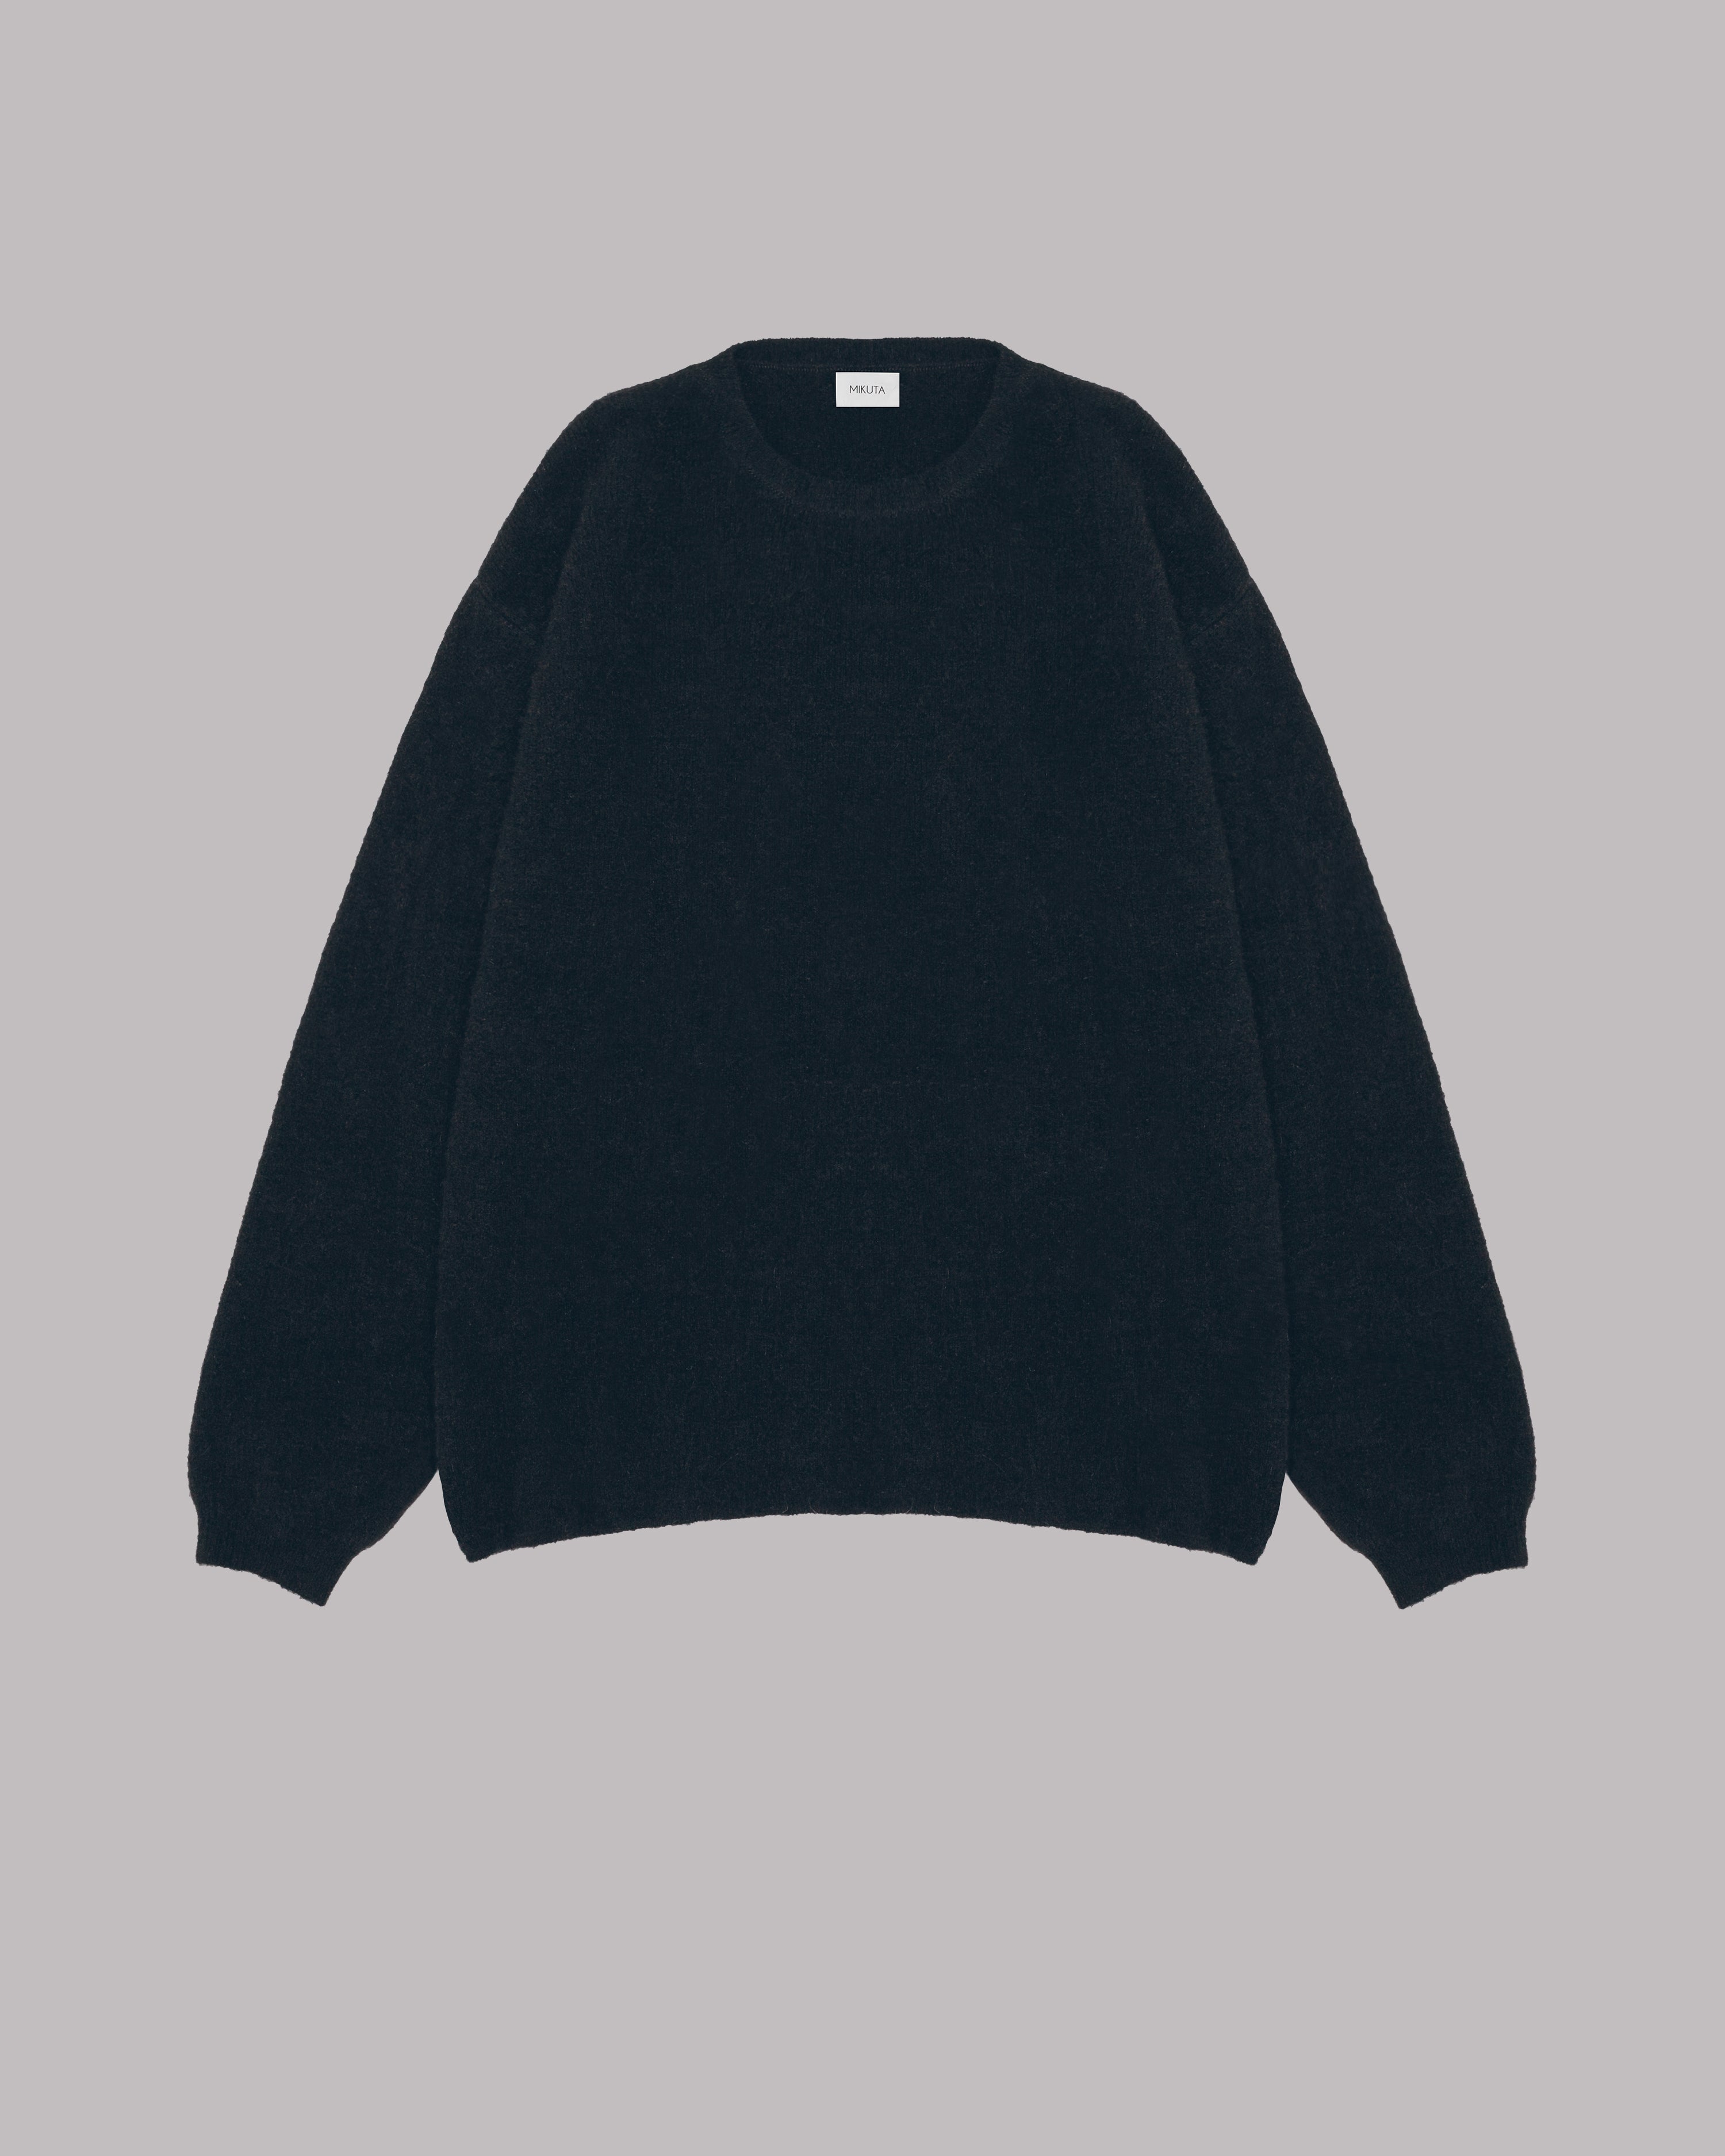 The Black Oversized Knitted Sweater